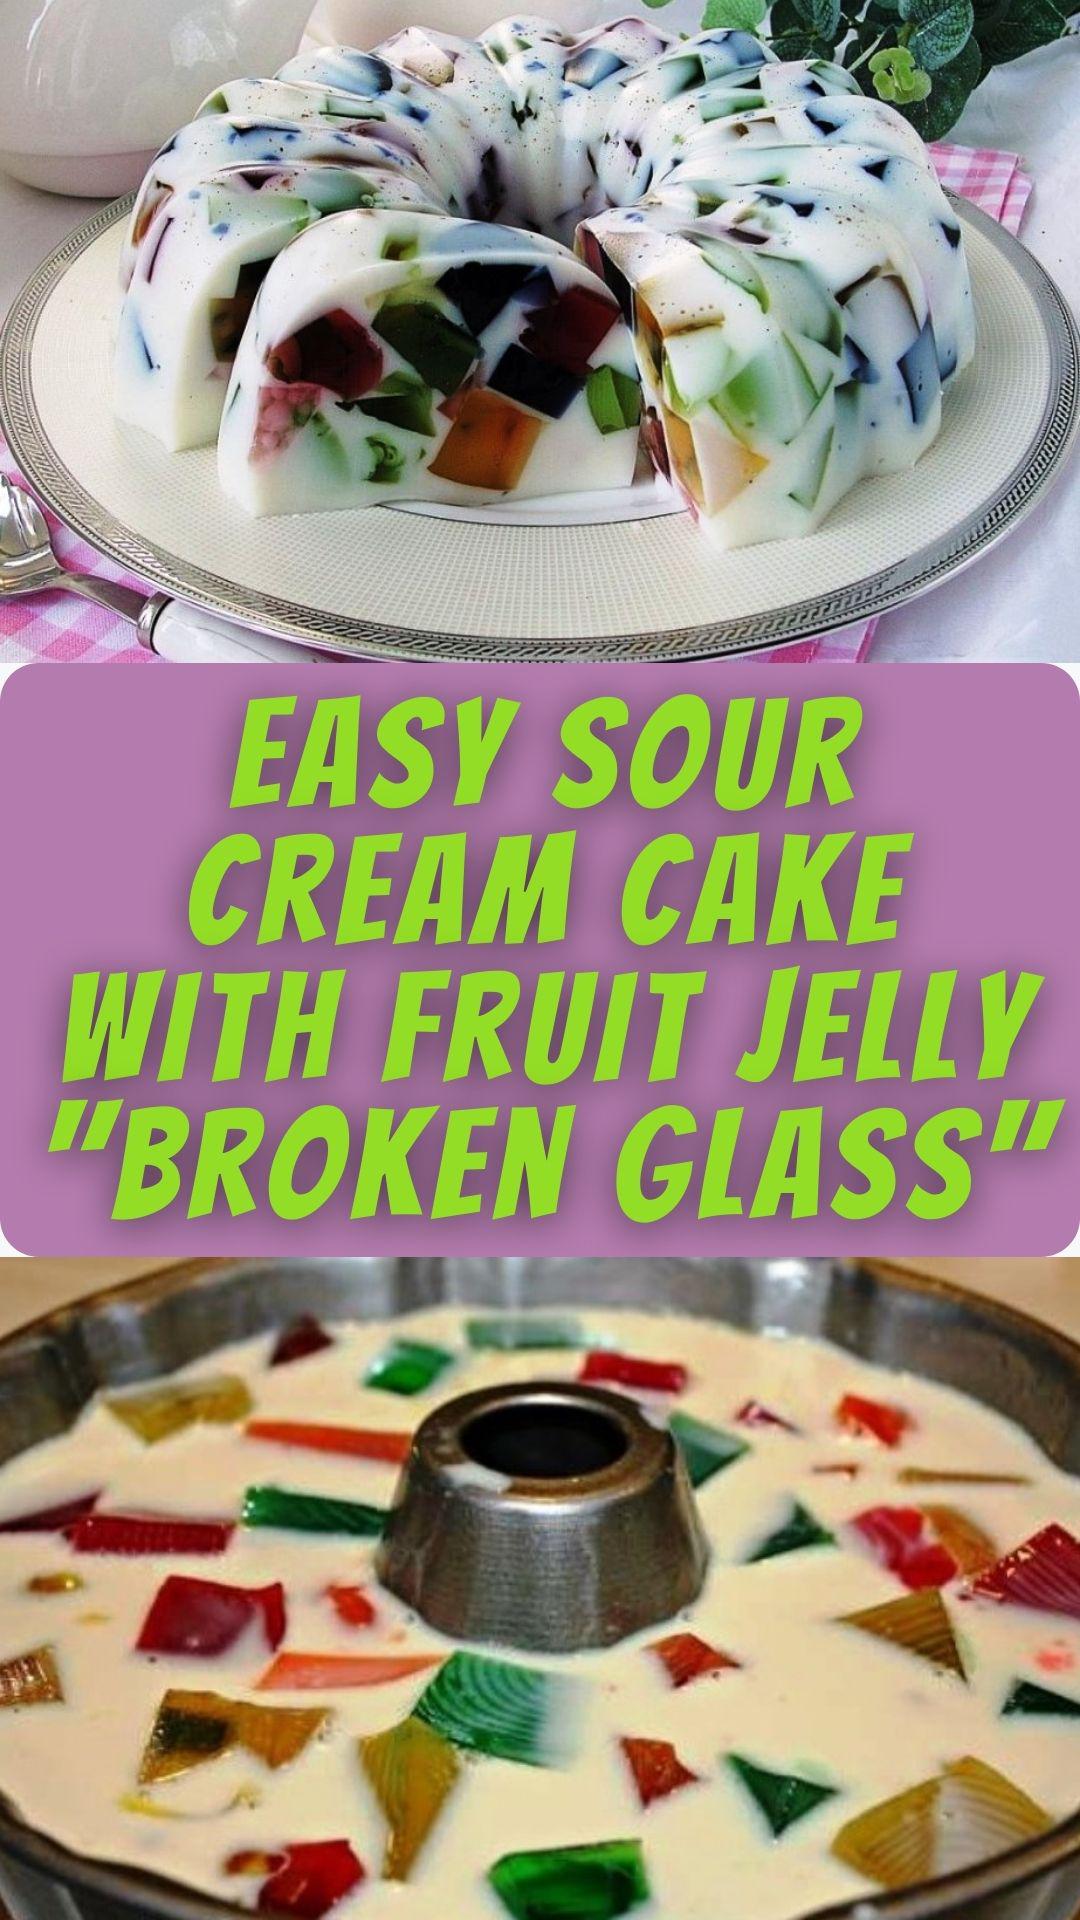 Easy sour cream cake with fruit jelly "Broken Glass"